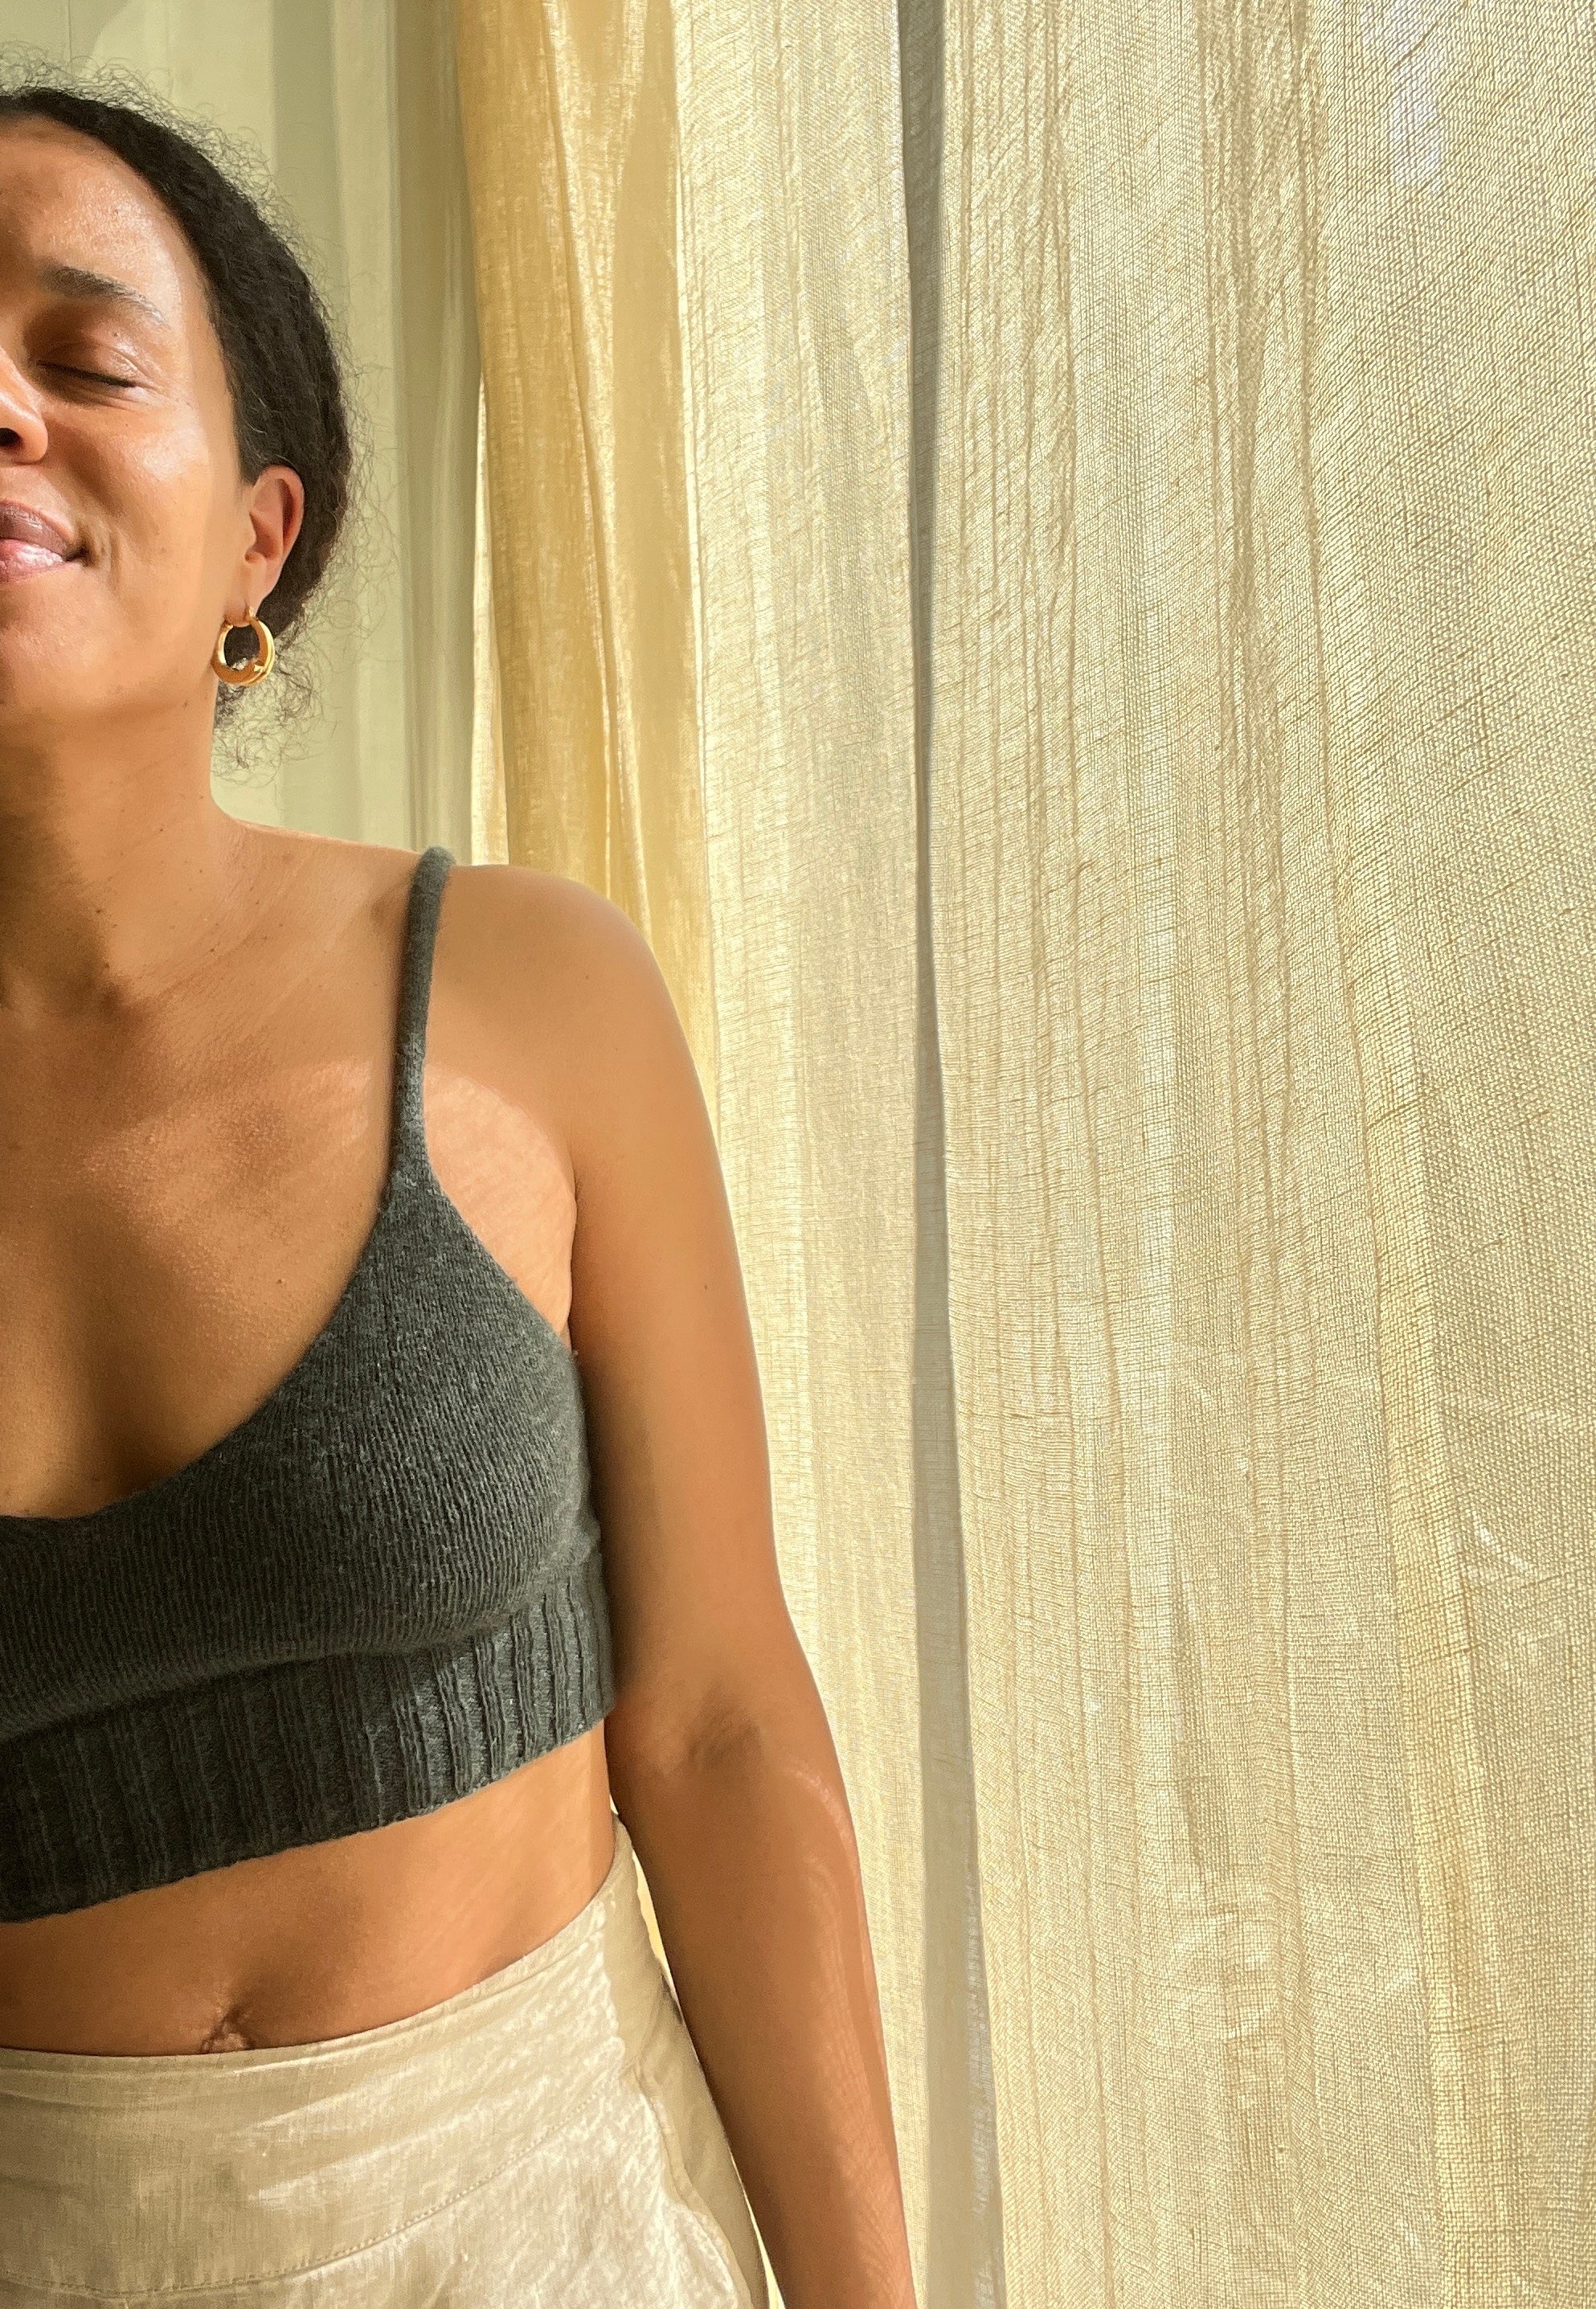 Trying To Knit A Bra In 24 Hours // The Basic Bra by Nakedknit